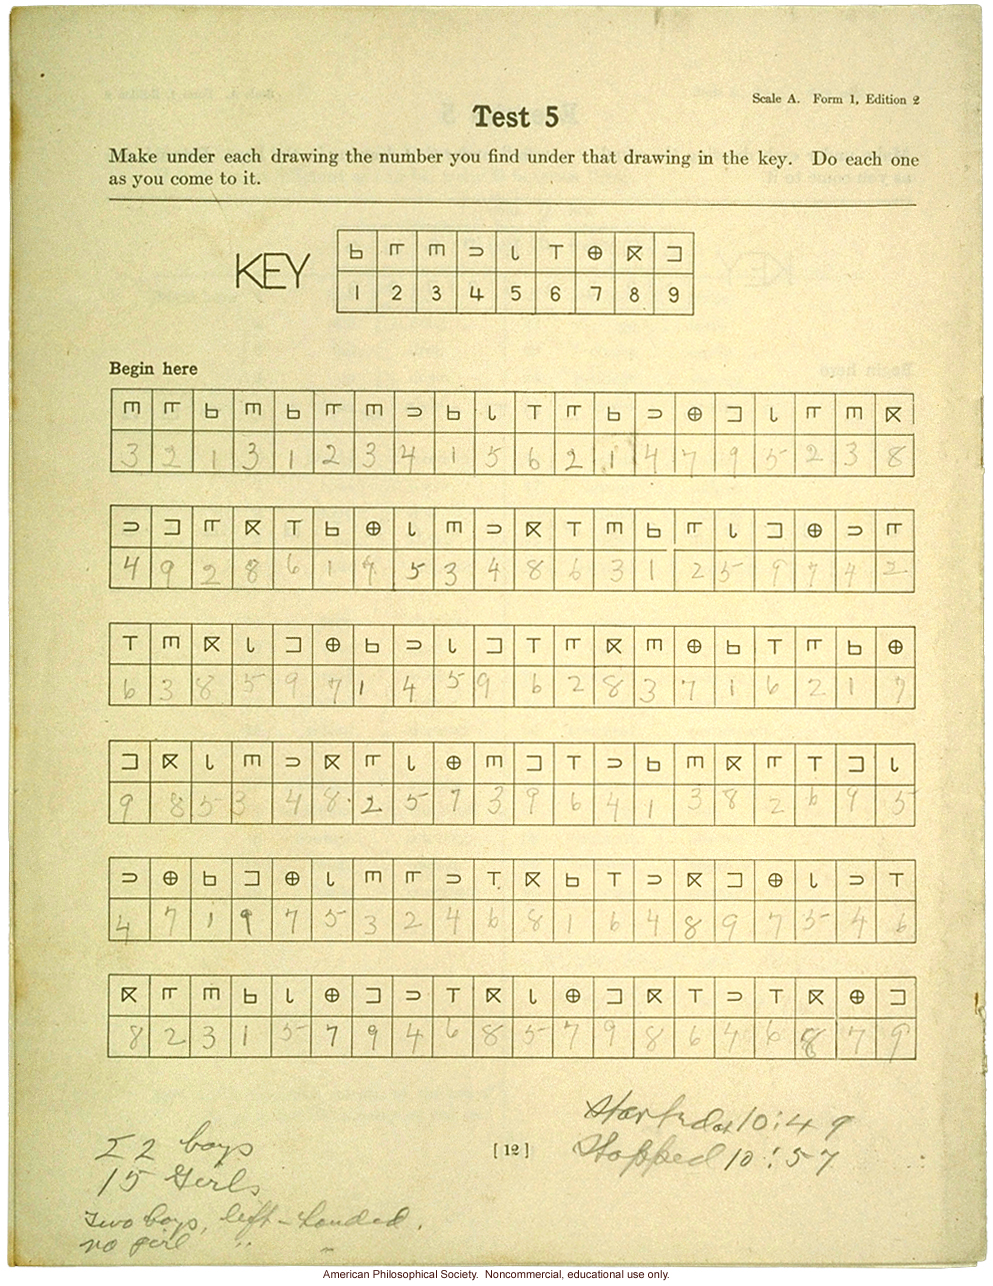 &quote;Large family&quote; winner, Fitter Families Contest, Eastern States Exposition, Springfield, MA (1925): National intelligence tests